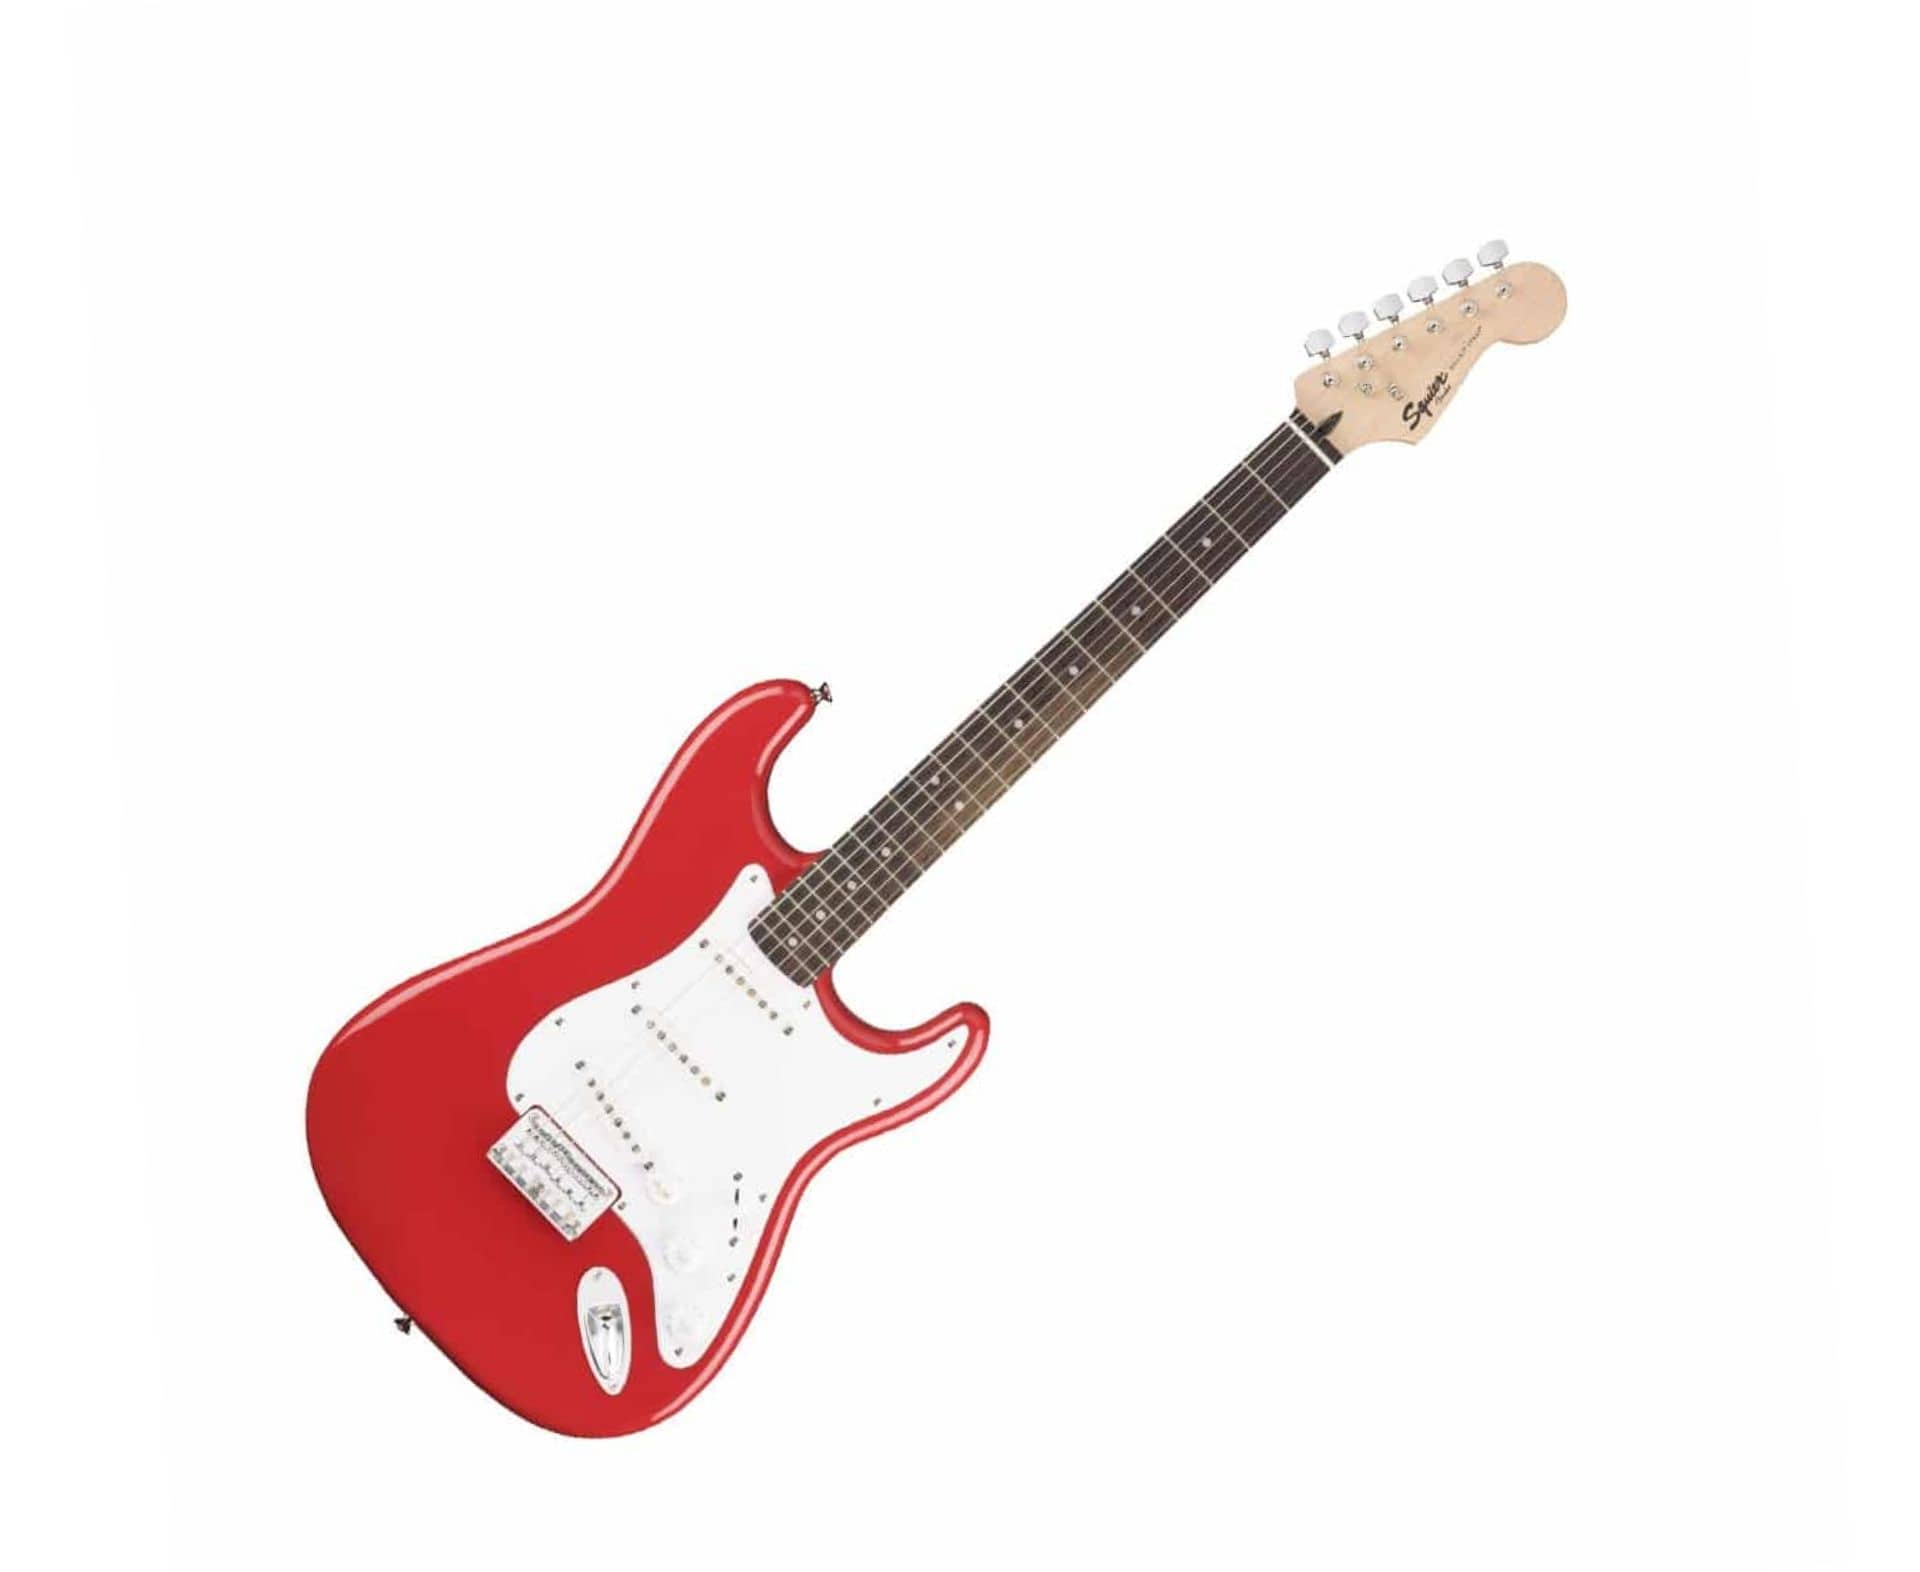 Squier by Fender  Stratocaster Ht Electric Guitar - Red